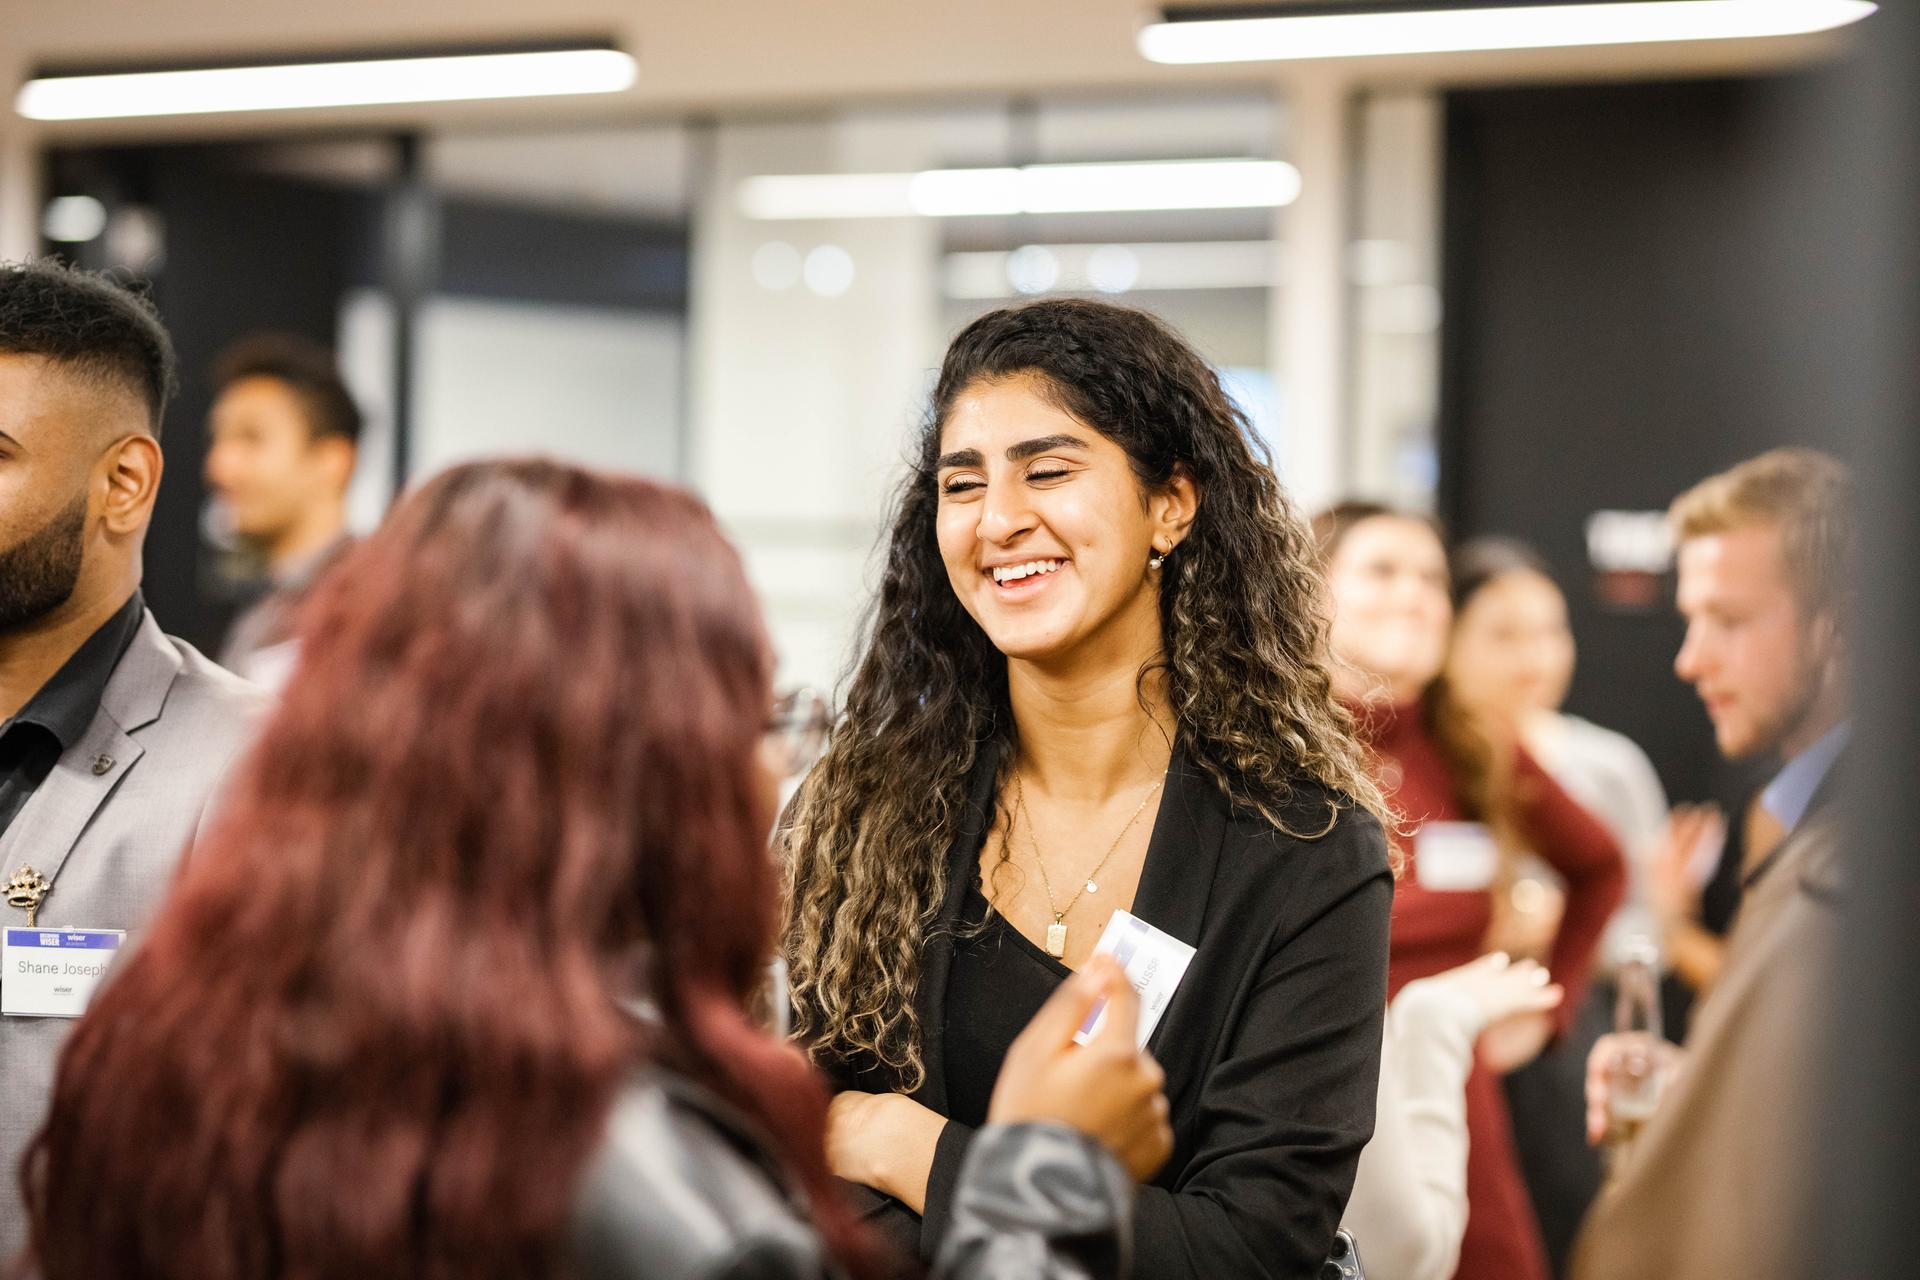 Student smiling and laughing while networking at a busy panel event